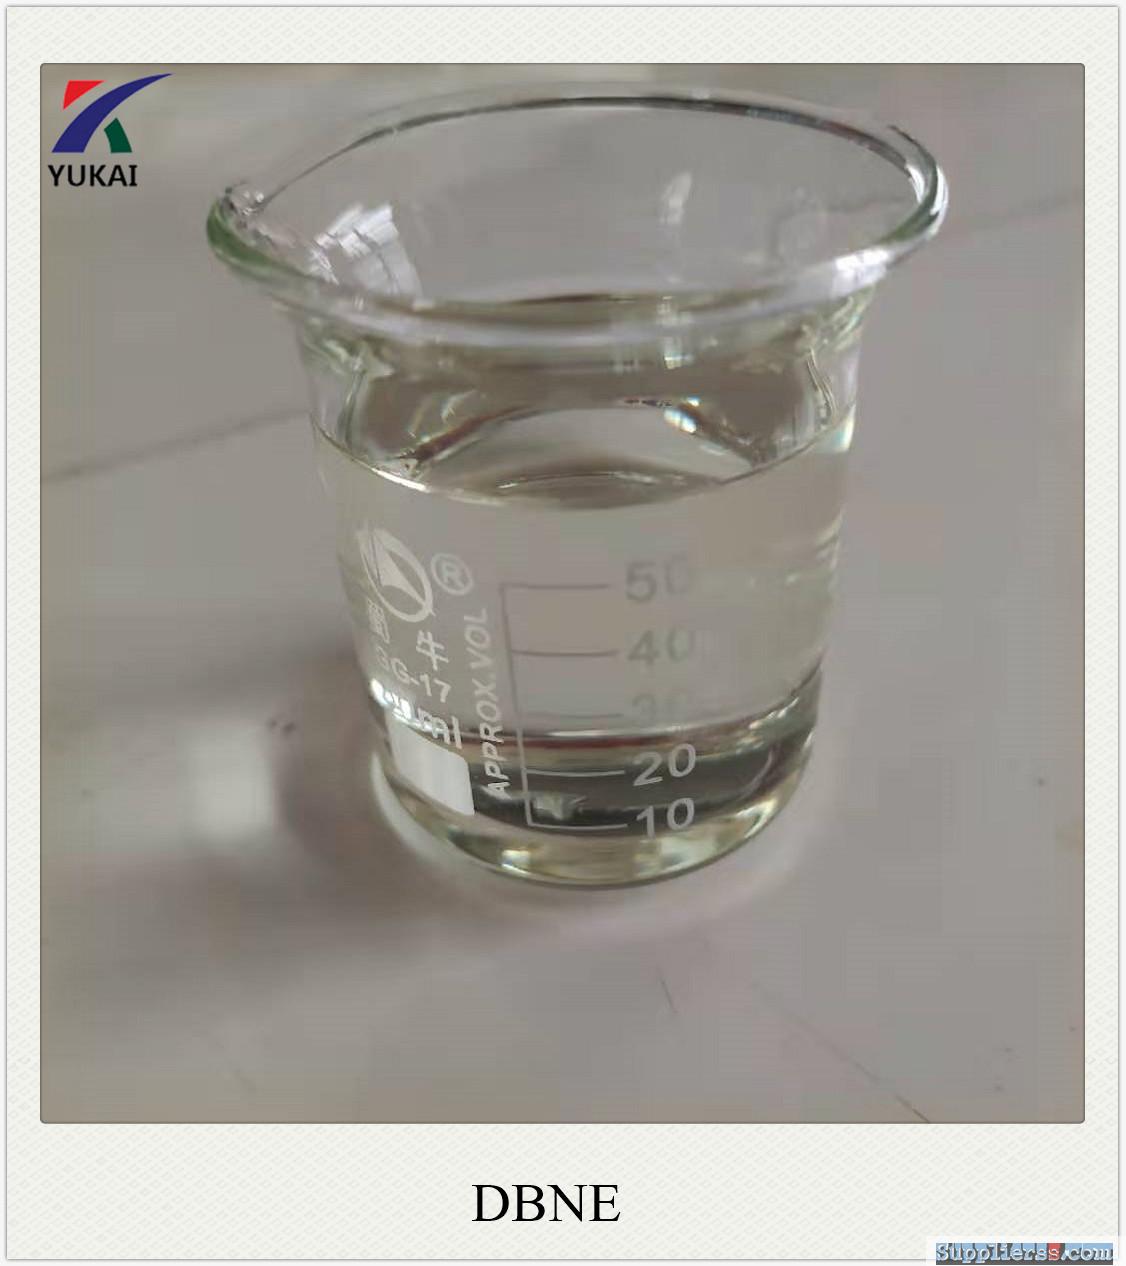 WATER TREATMENT BIOCIDE DBNE 30% SOLUTION 69094-18-4